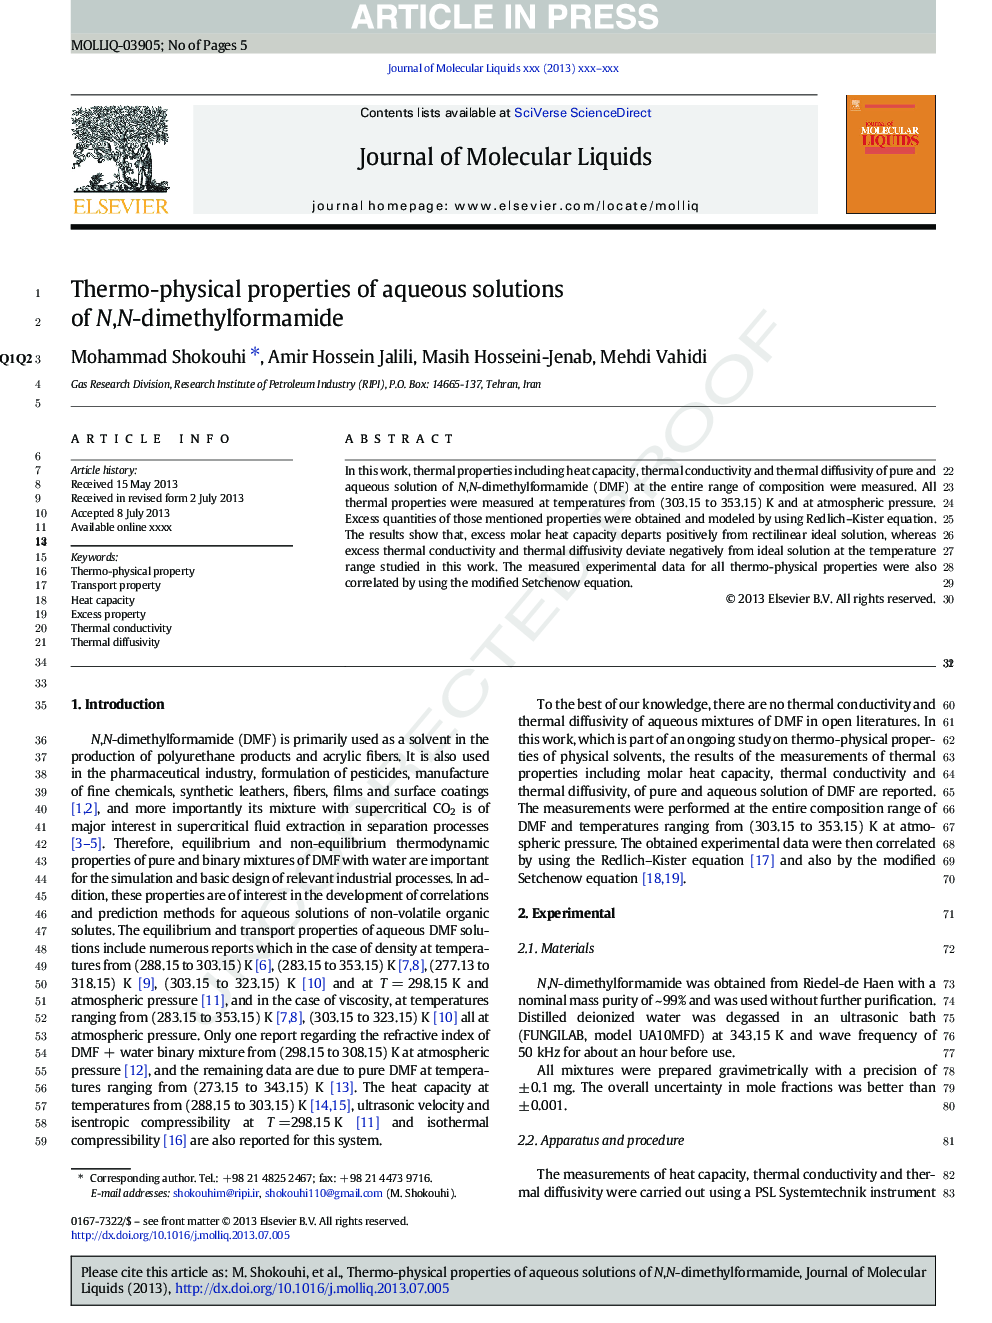 Thermo-physical properties of aqueous solutions of N,N-dimethylformamide